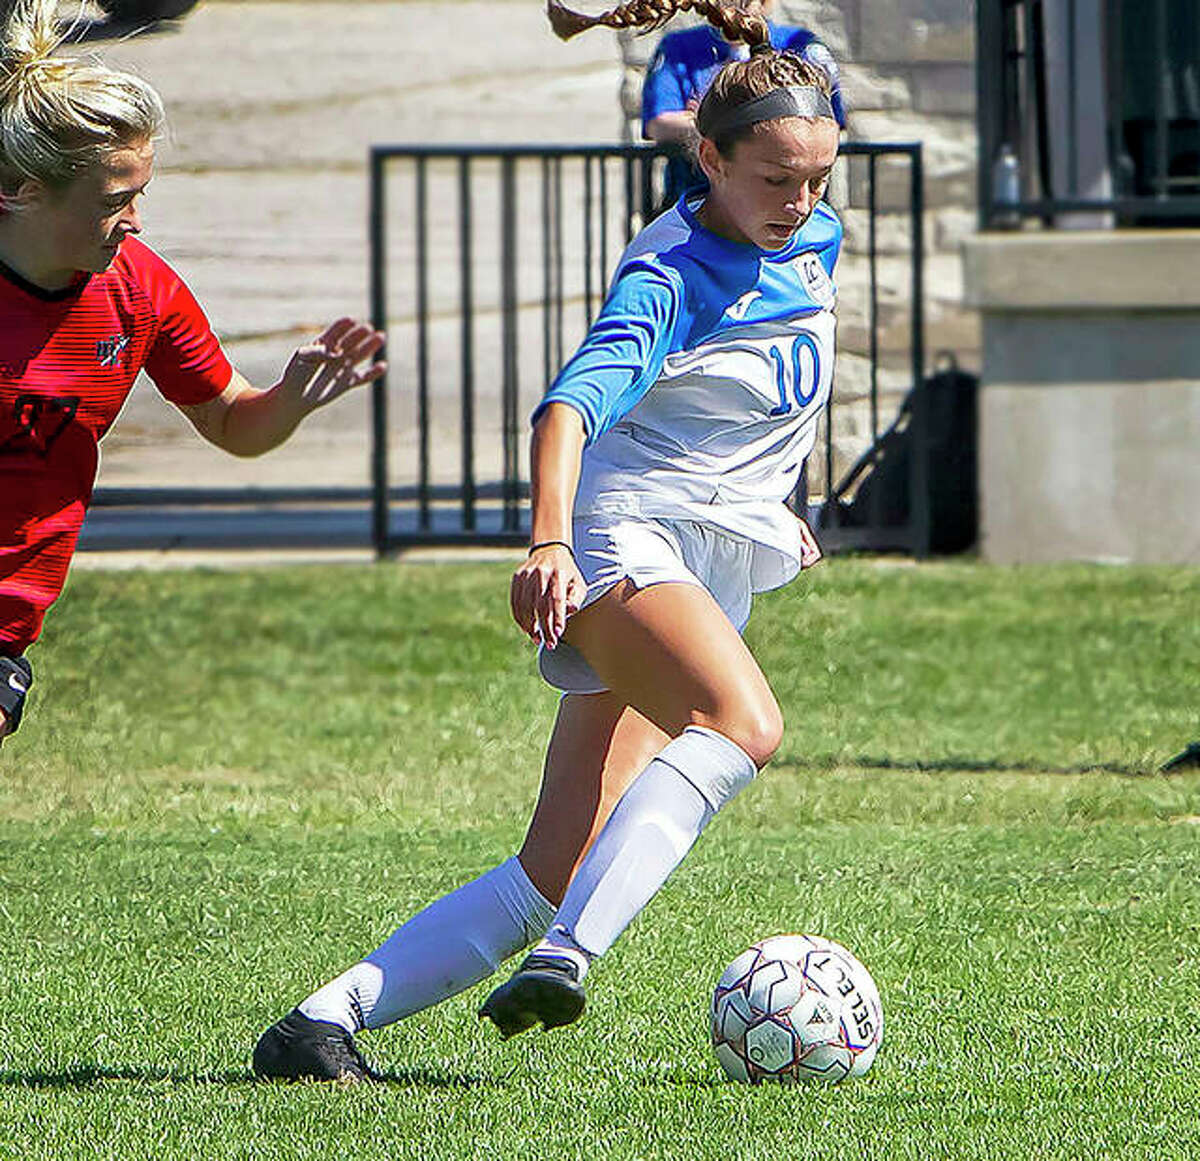 Grace Osvath of Lewis and Clark Community College (10) scored four goals in the Trailblazers’ 11-0 victory at Kankakee College Sunday.